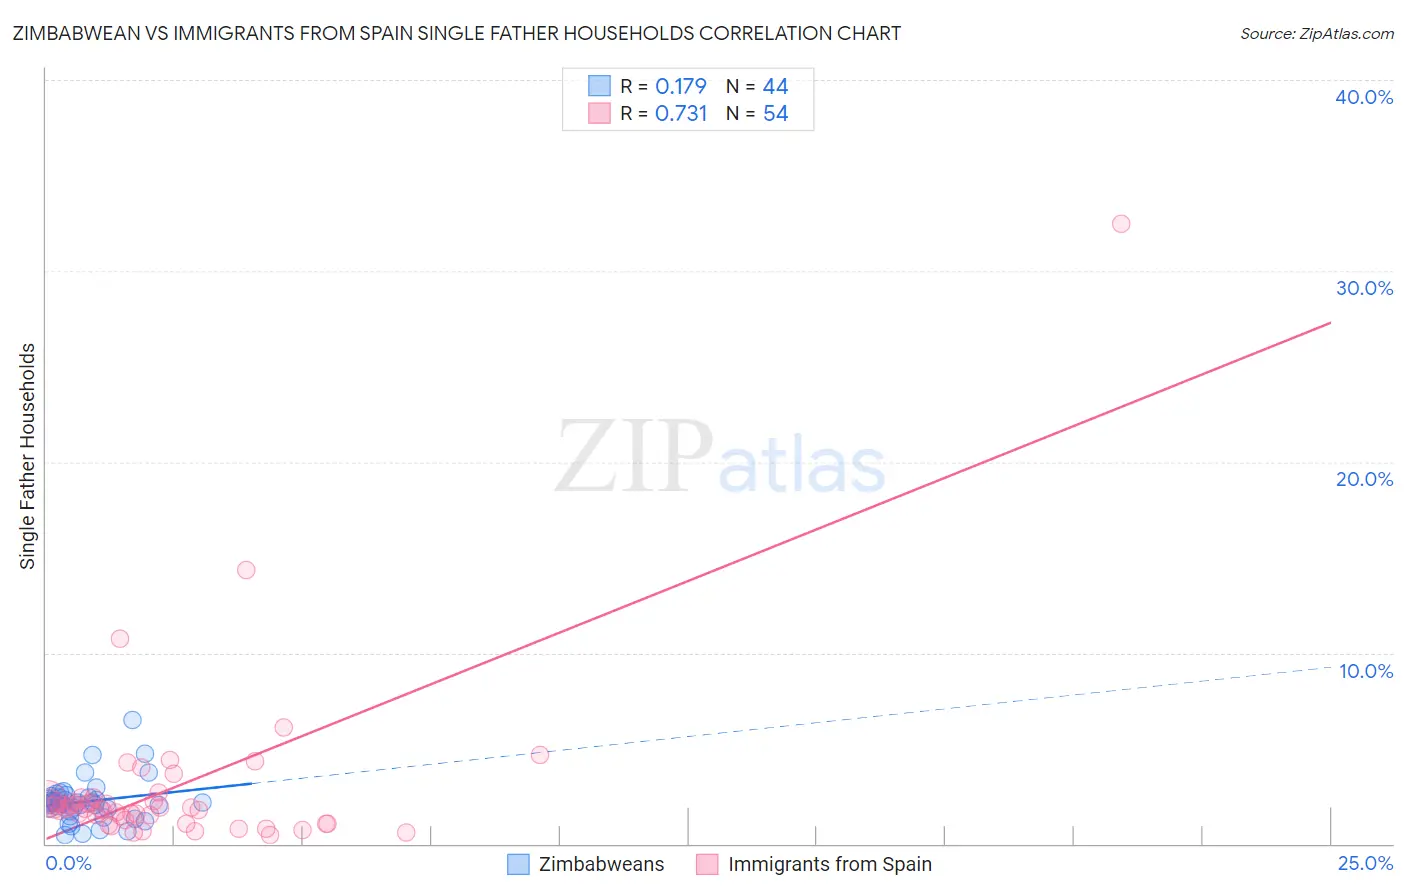 Zimbabwean vs Immigrants from Spain Single Father Households